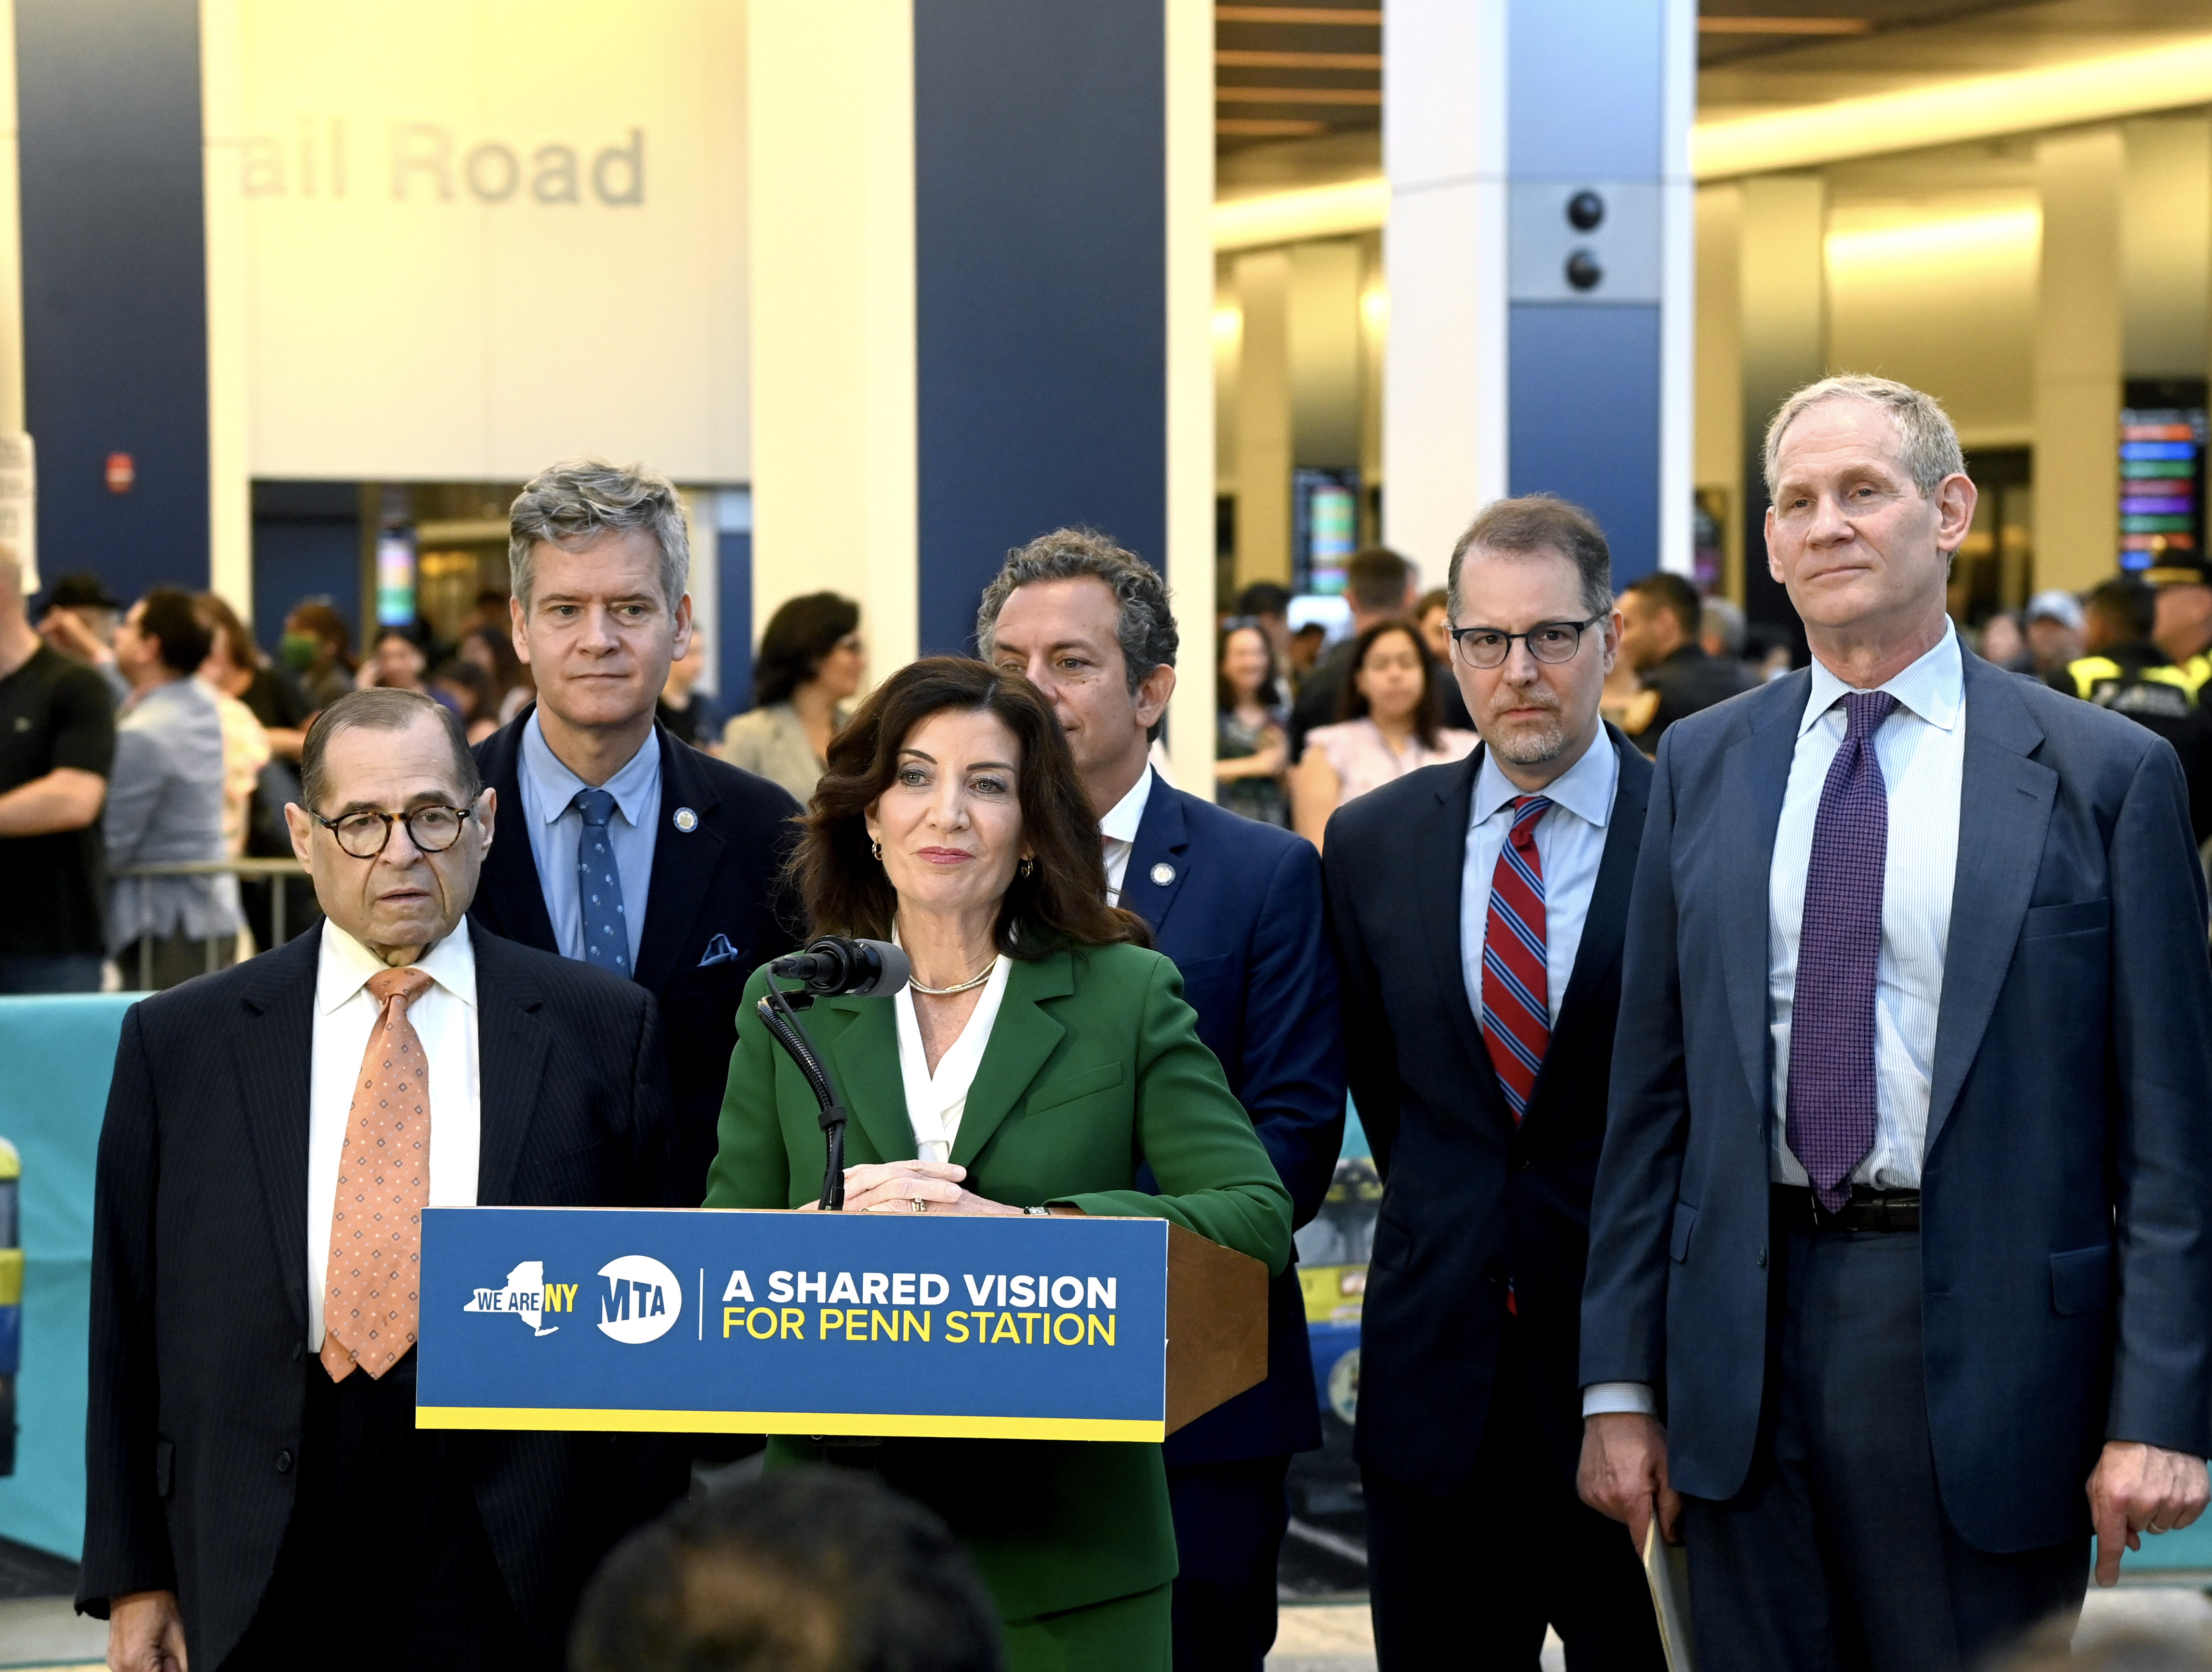 ICYMI: Governor Hochul, Elected Officials and Railroad Partners Unite on Vision for Penn Station Modernization Plan